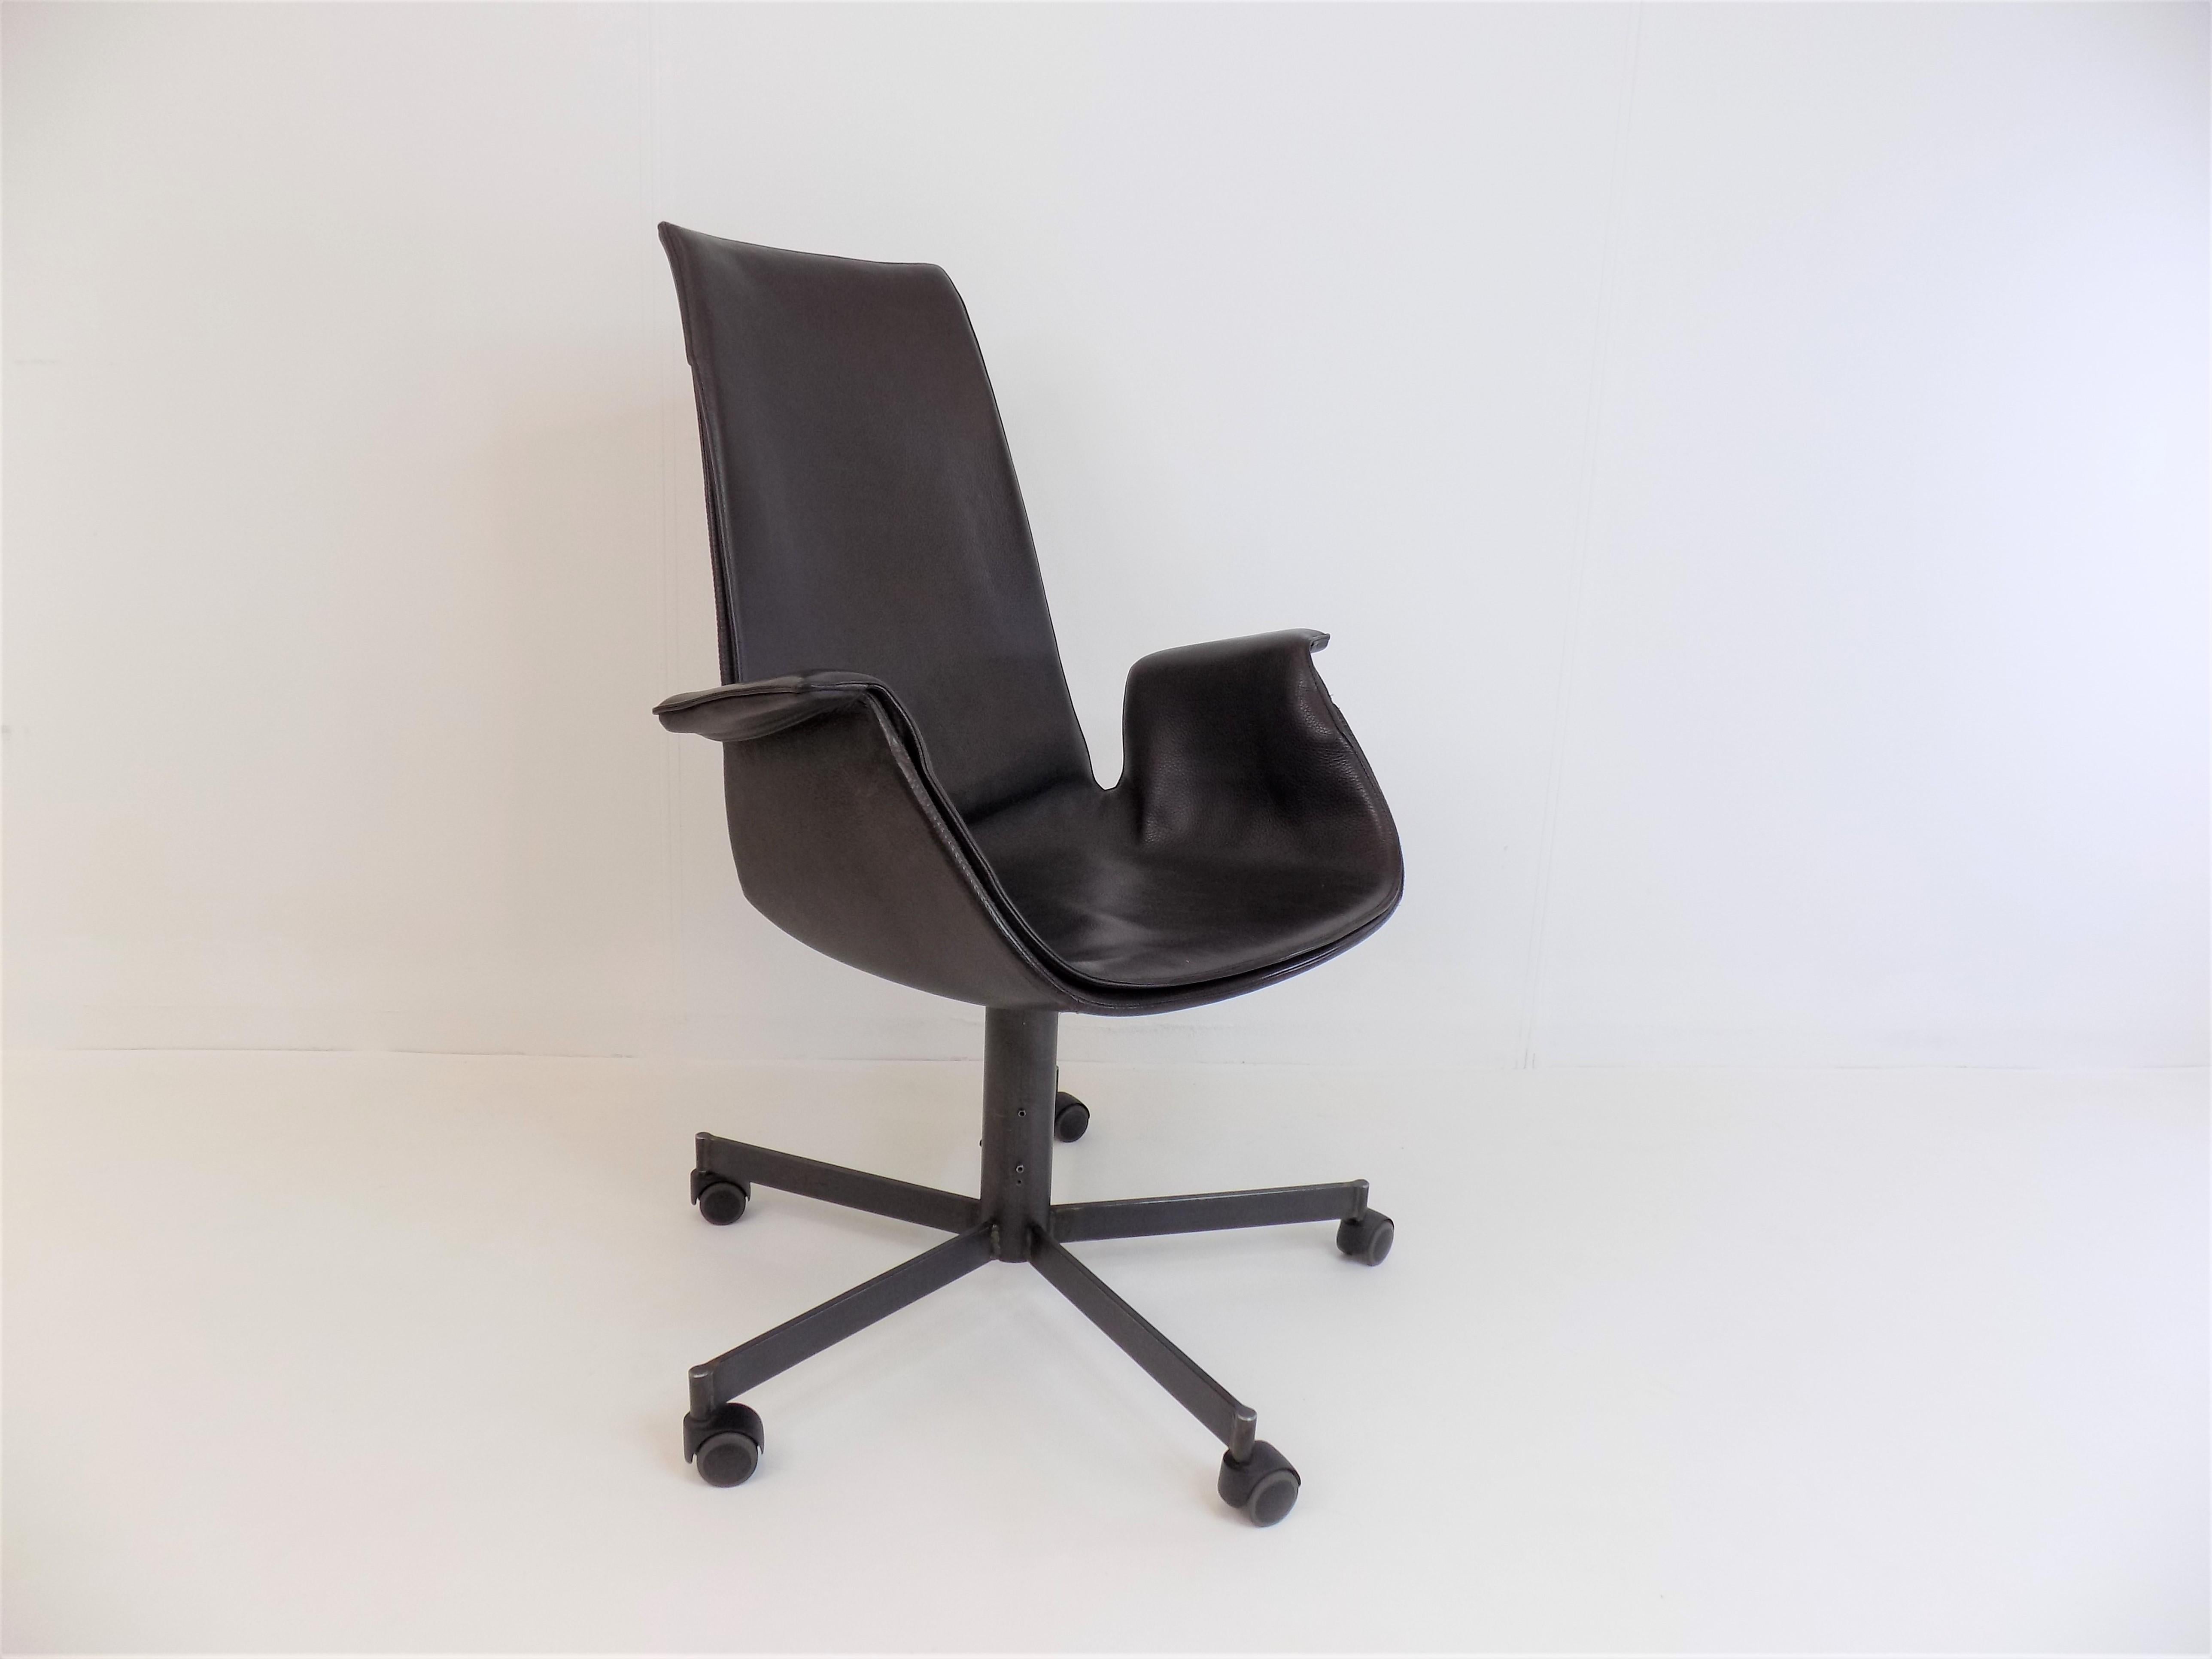 The FK6725 office chair comes in the leather tone deep chocolate and is in very good condition. The beautiful nappa leather of the chair is flawless and soft, except for one spot on the left armrest. The chair has a dark gray metal frame with